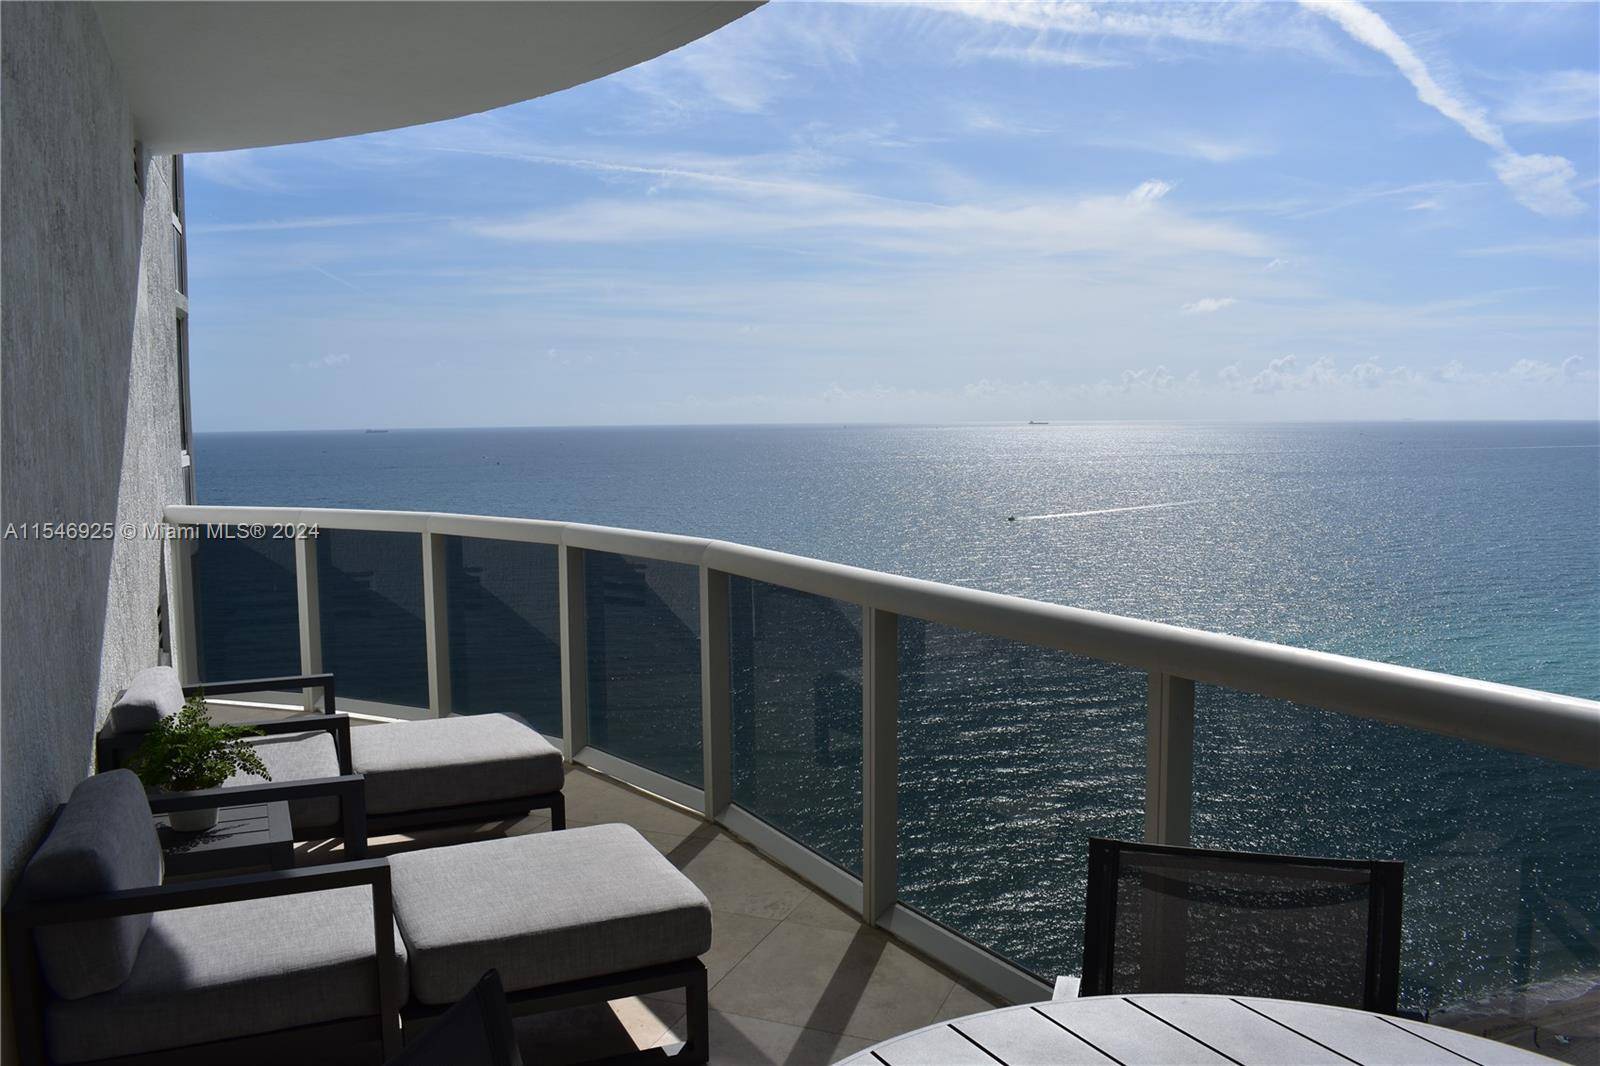 Exquisite beachfront condo in Sunny Isles Beach, Florida, boasting fully furnished elegance and breathtaking ocean views.